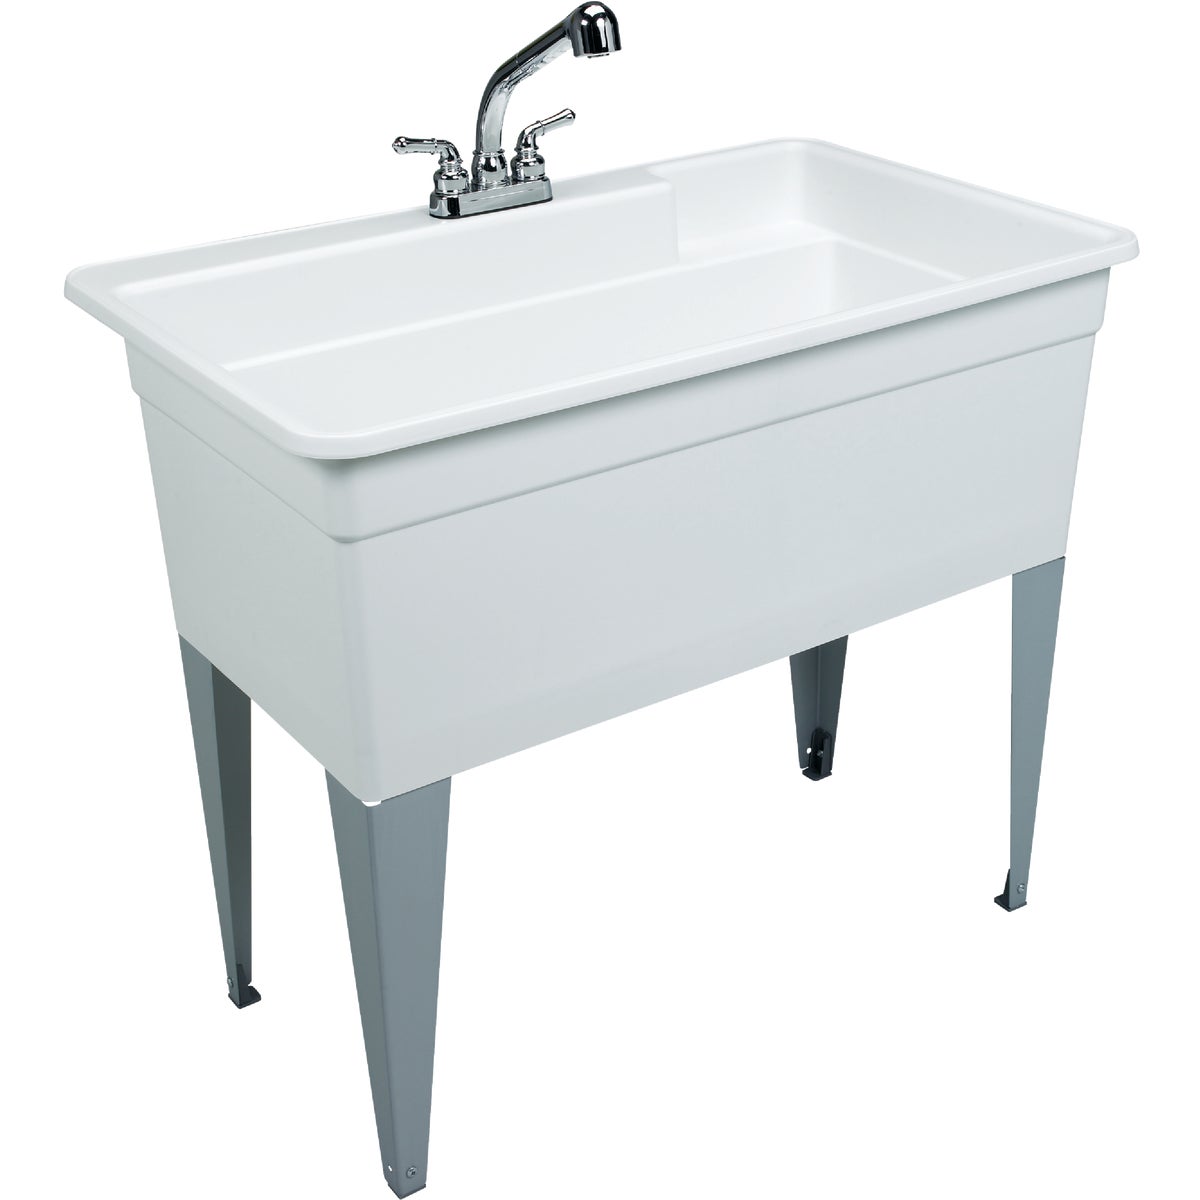 Item 401875, King sized single bowl multi-purpose floor sink that's great for washing 